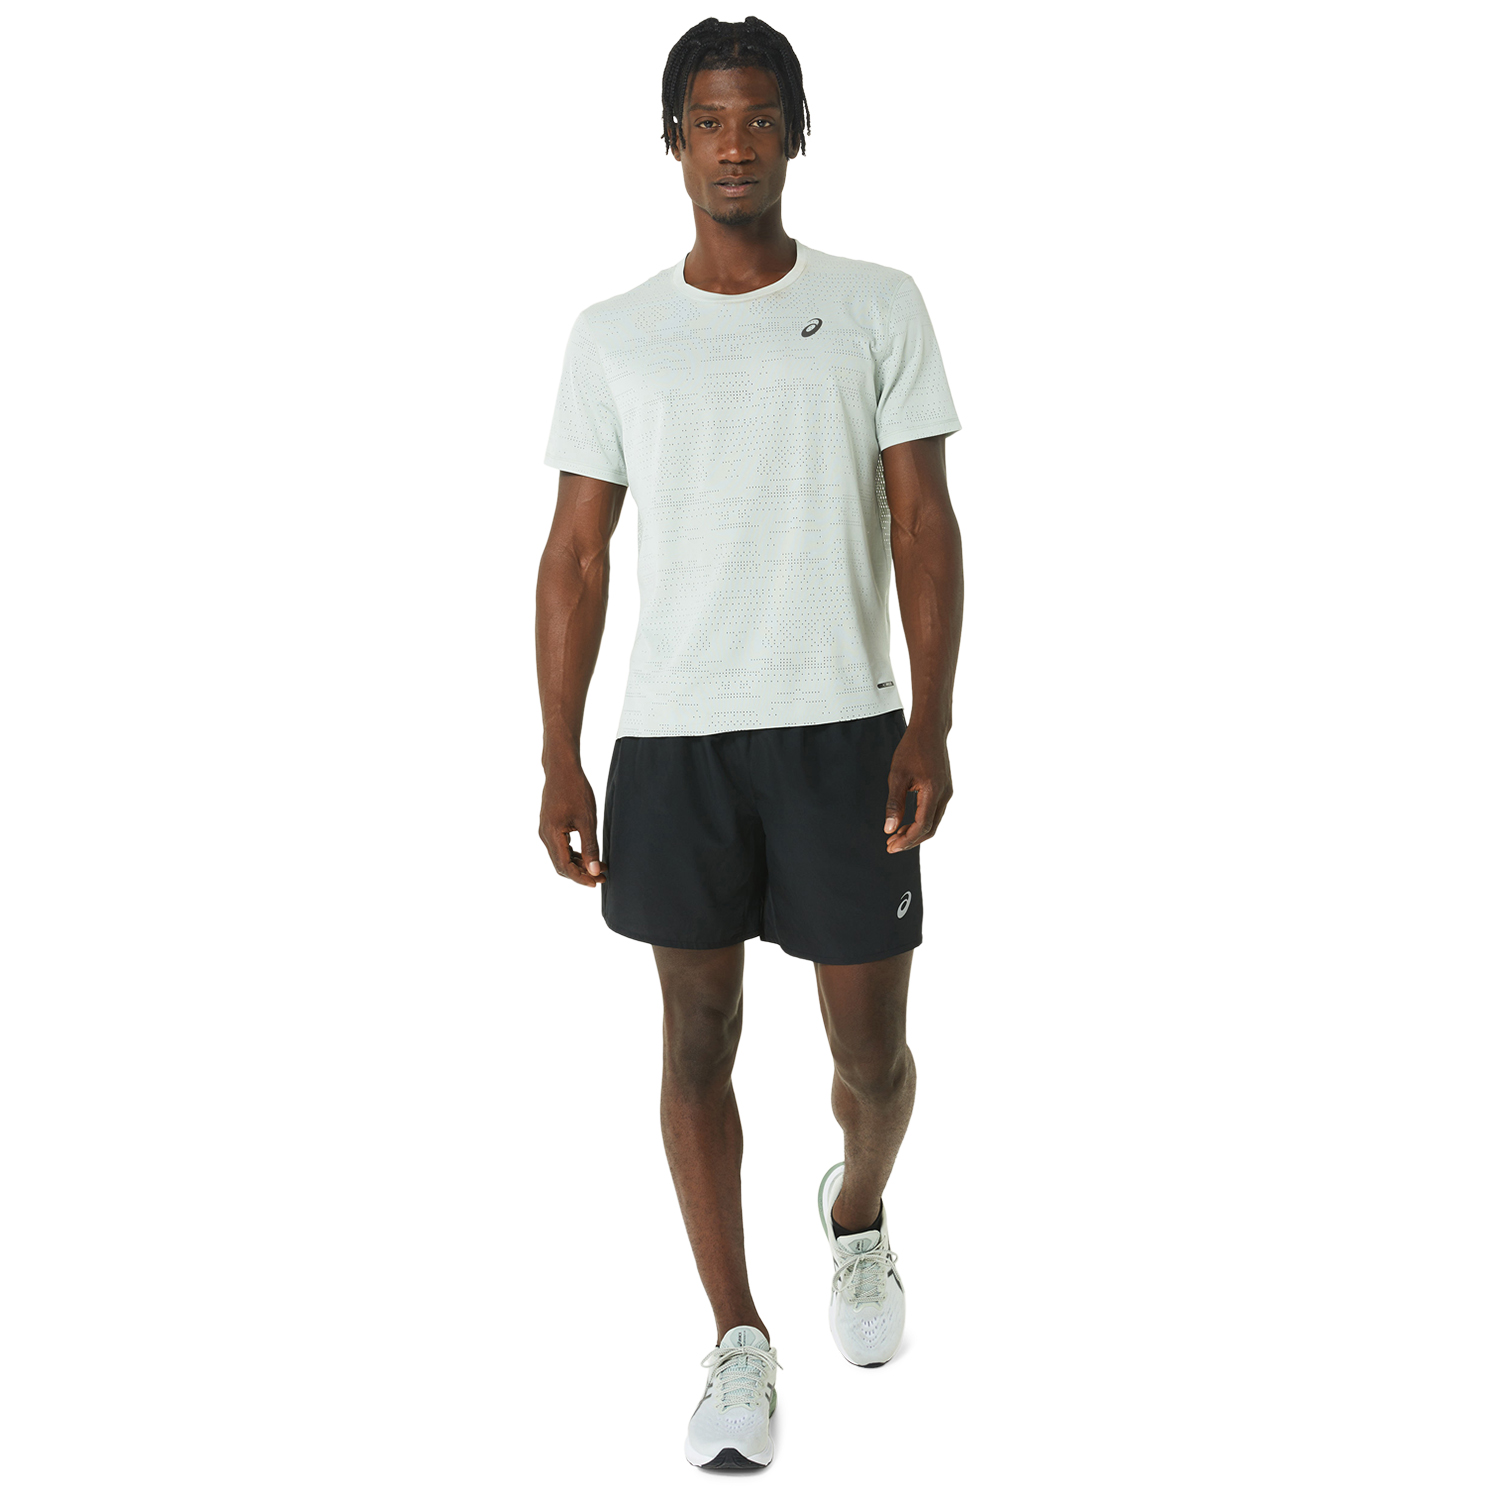 Asics Icon 7in Shorts - Performance Black/Carrier Grey